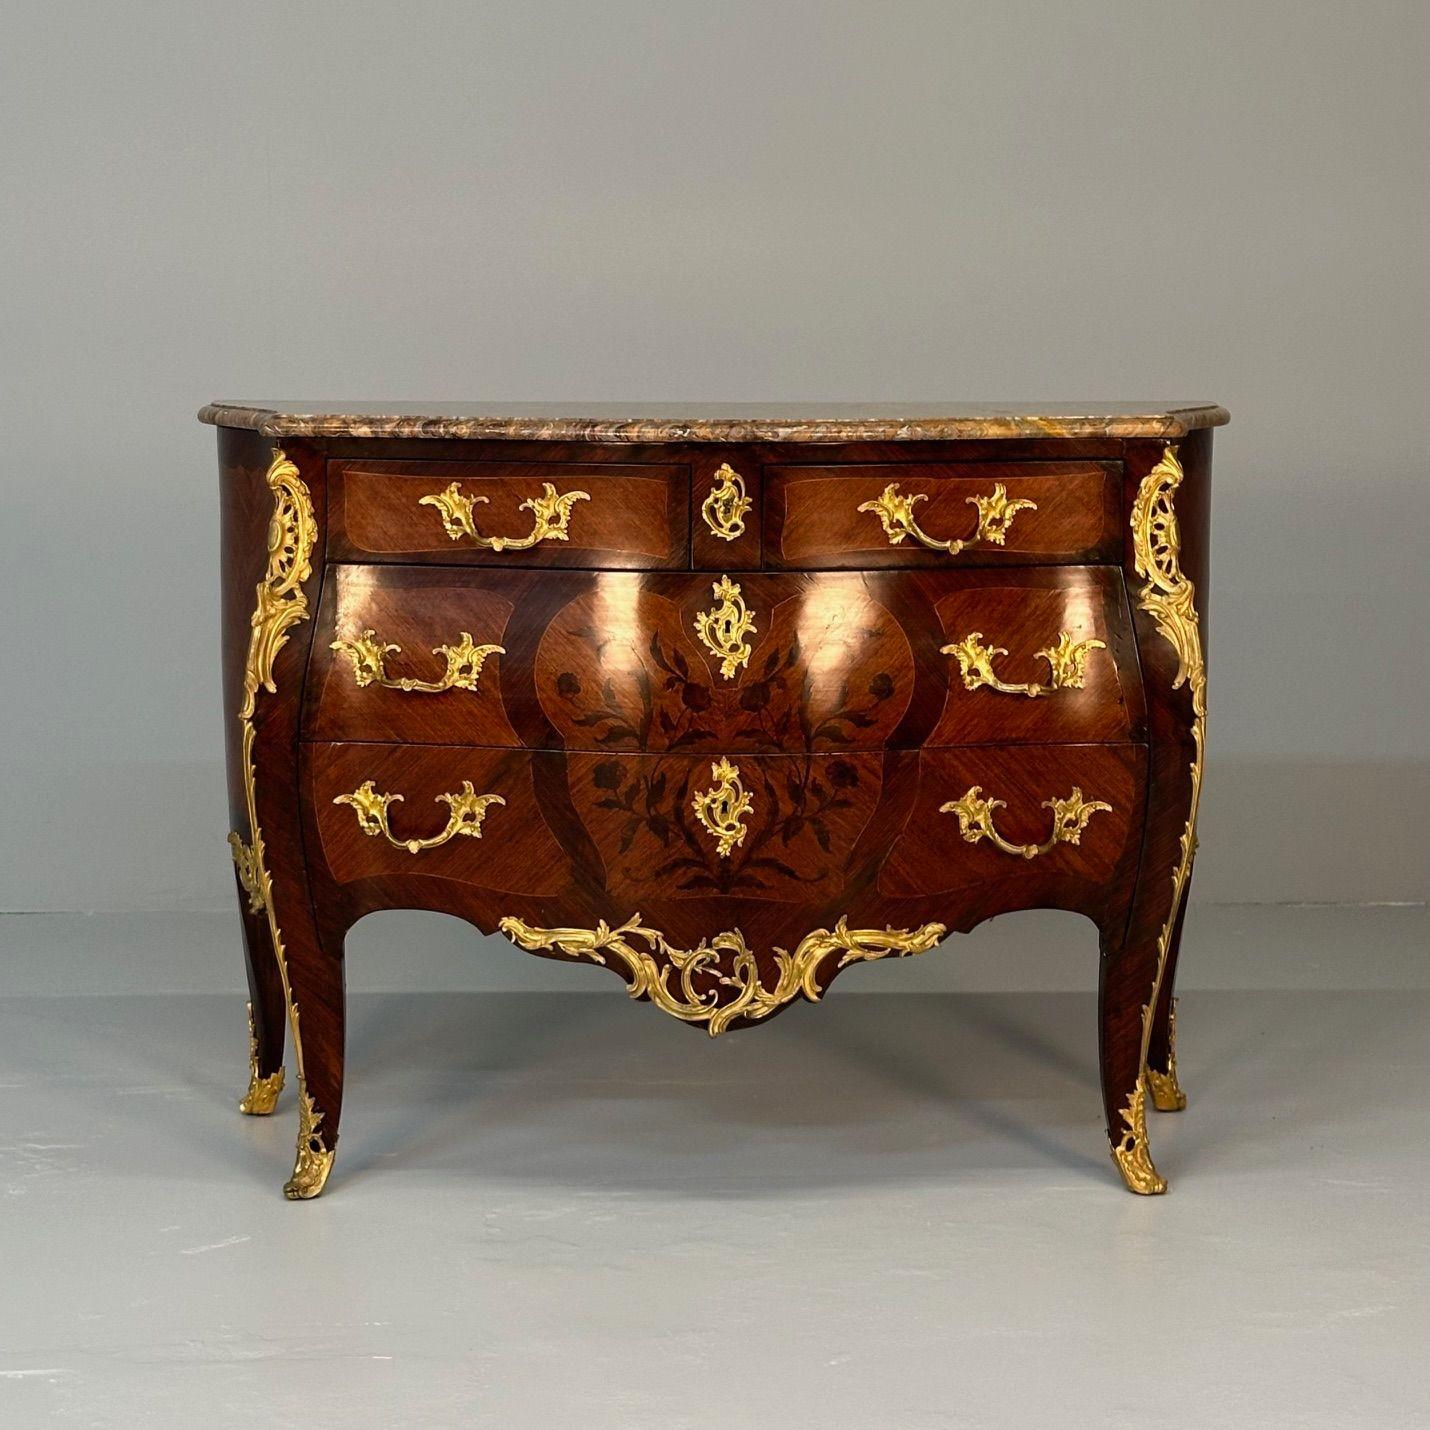 19th Century French Bombe Louis XV Style Marble Top Commode with Floral Inlays, Professionally refinished

19th century French Bombe Louis XV style marble-top commode with floral inlays. Fully restored and refinished to its original luster this